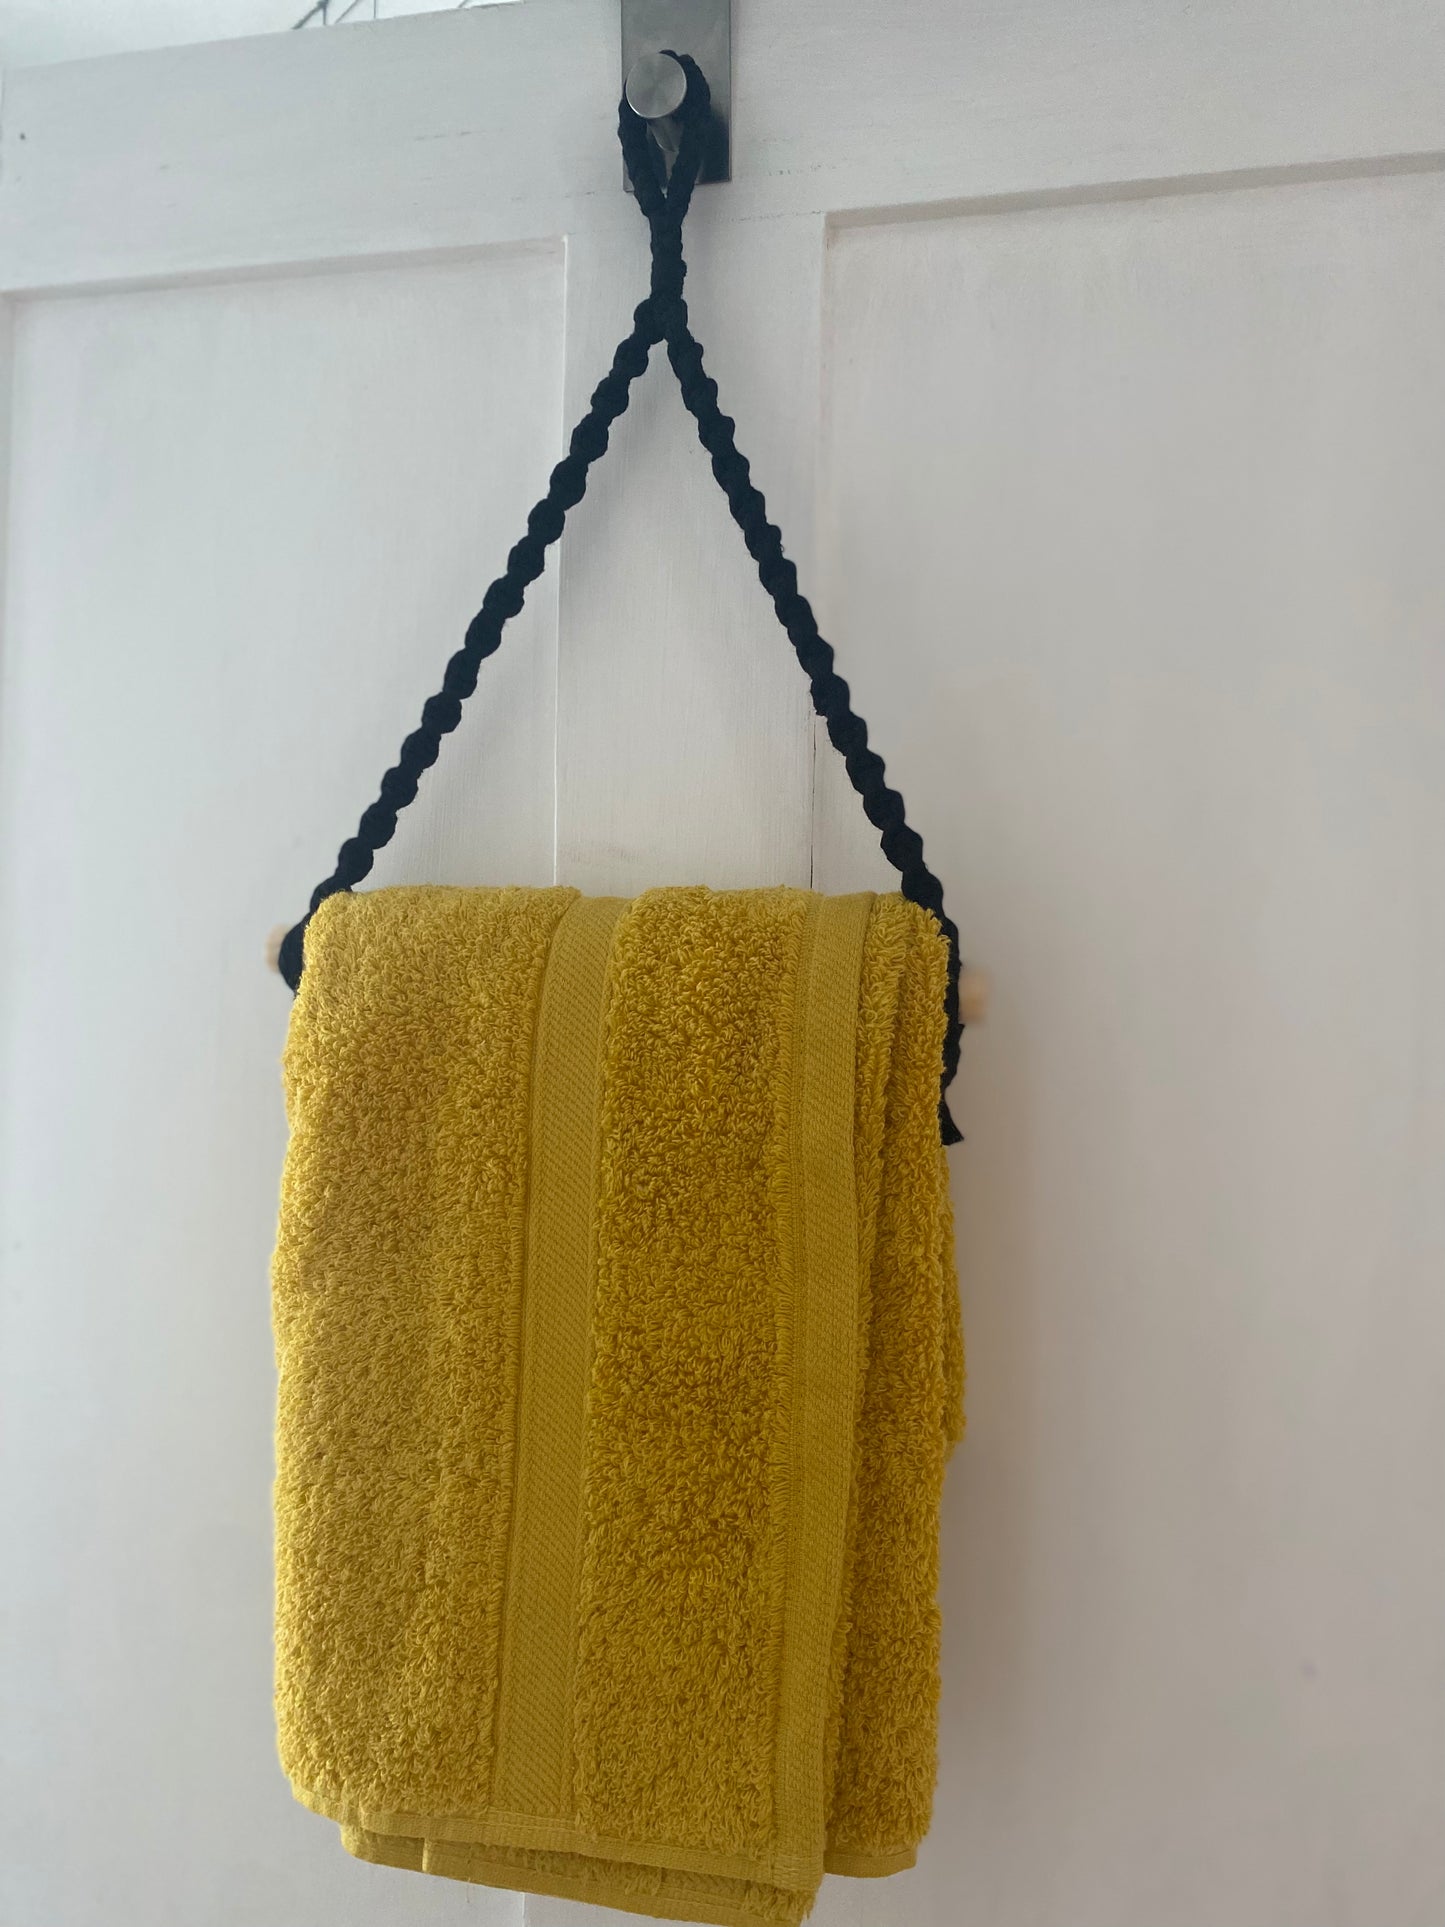 A yellow towel made from sustainable recycled cotton is hanging on a white wooden door by a black braided cord and wooden rod from the Hand towel holder by Macra-Made-With-Love. The towel is neatly folded, with two vertical stripes along its edge. The simple, white-painted door contrasts with the bright eco-friendly towel.